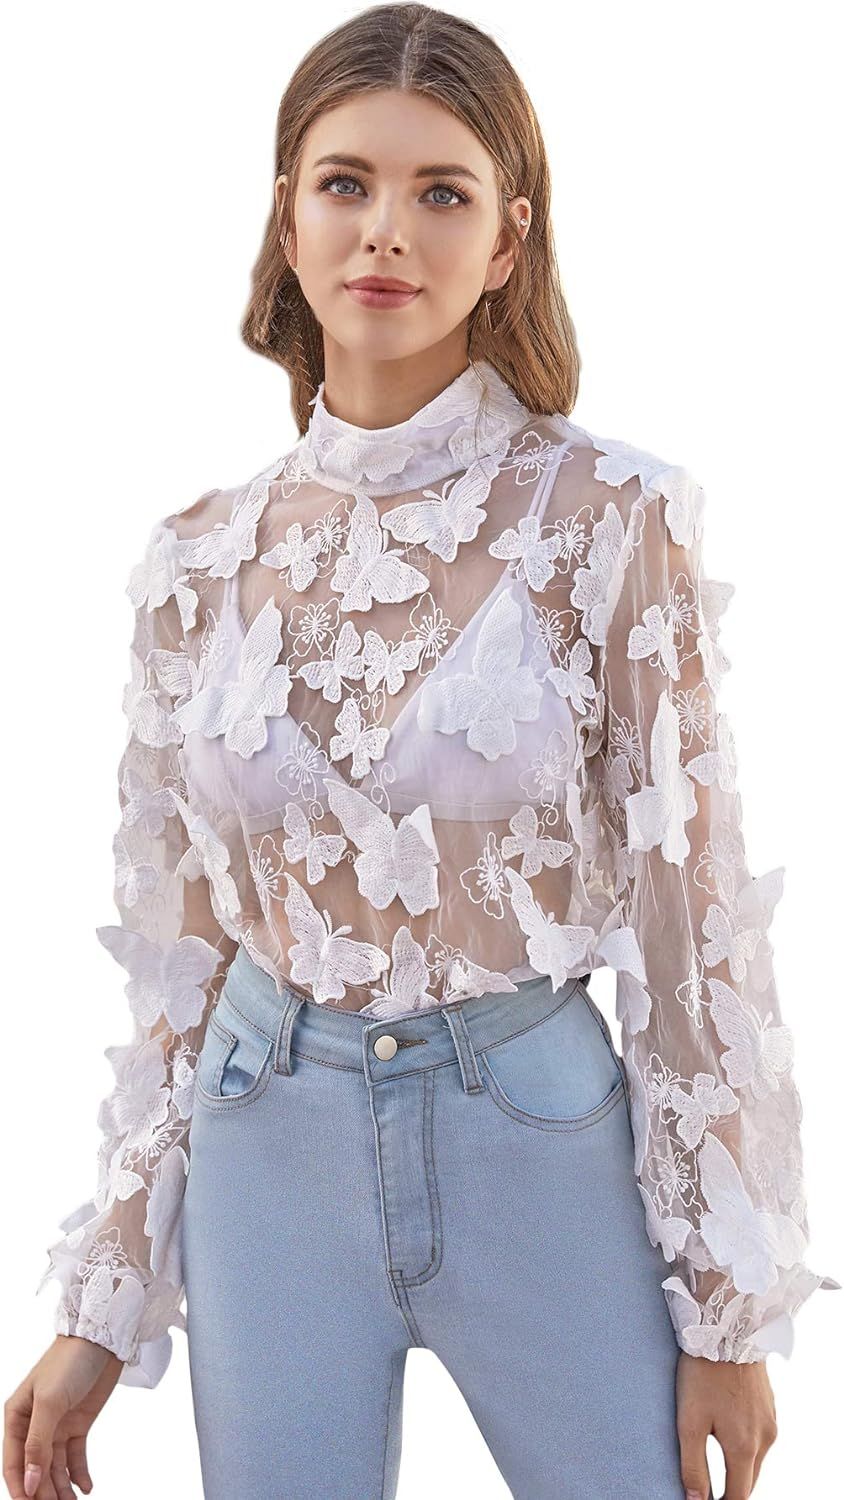 Floerns Women's Sexy Butterfly Embroidery Sheer Mesh Blouse Top | Amazon (US)